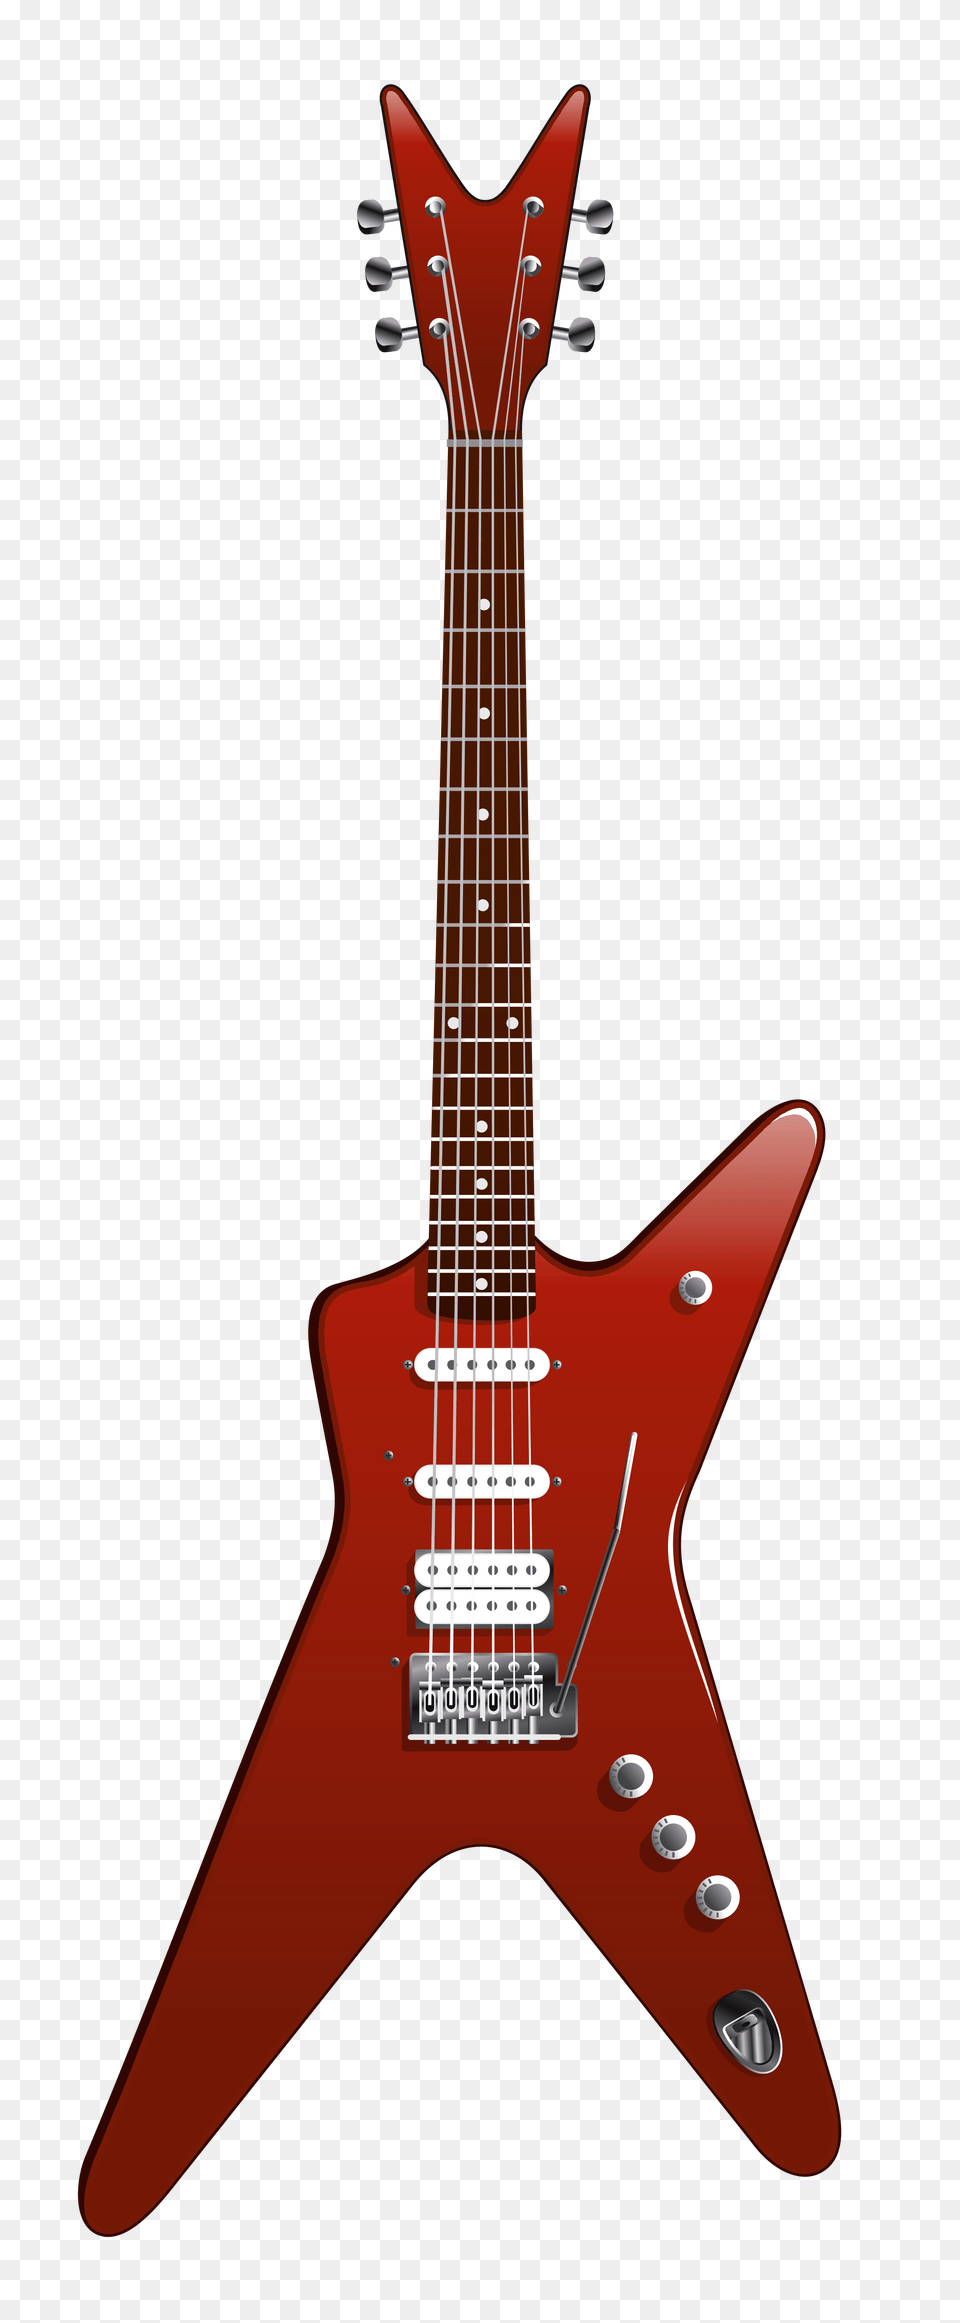 Modern Red Guitar, Electric Guitar, Musical Instrument Png Image